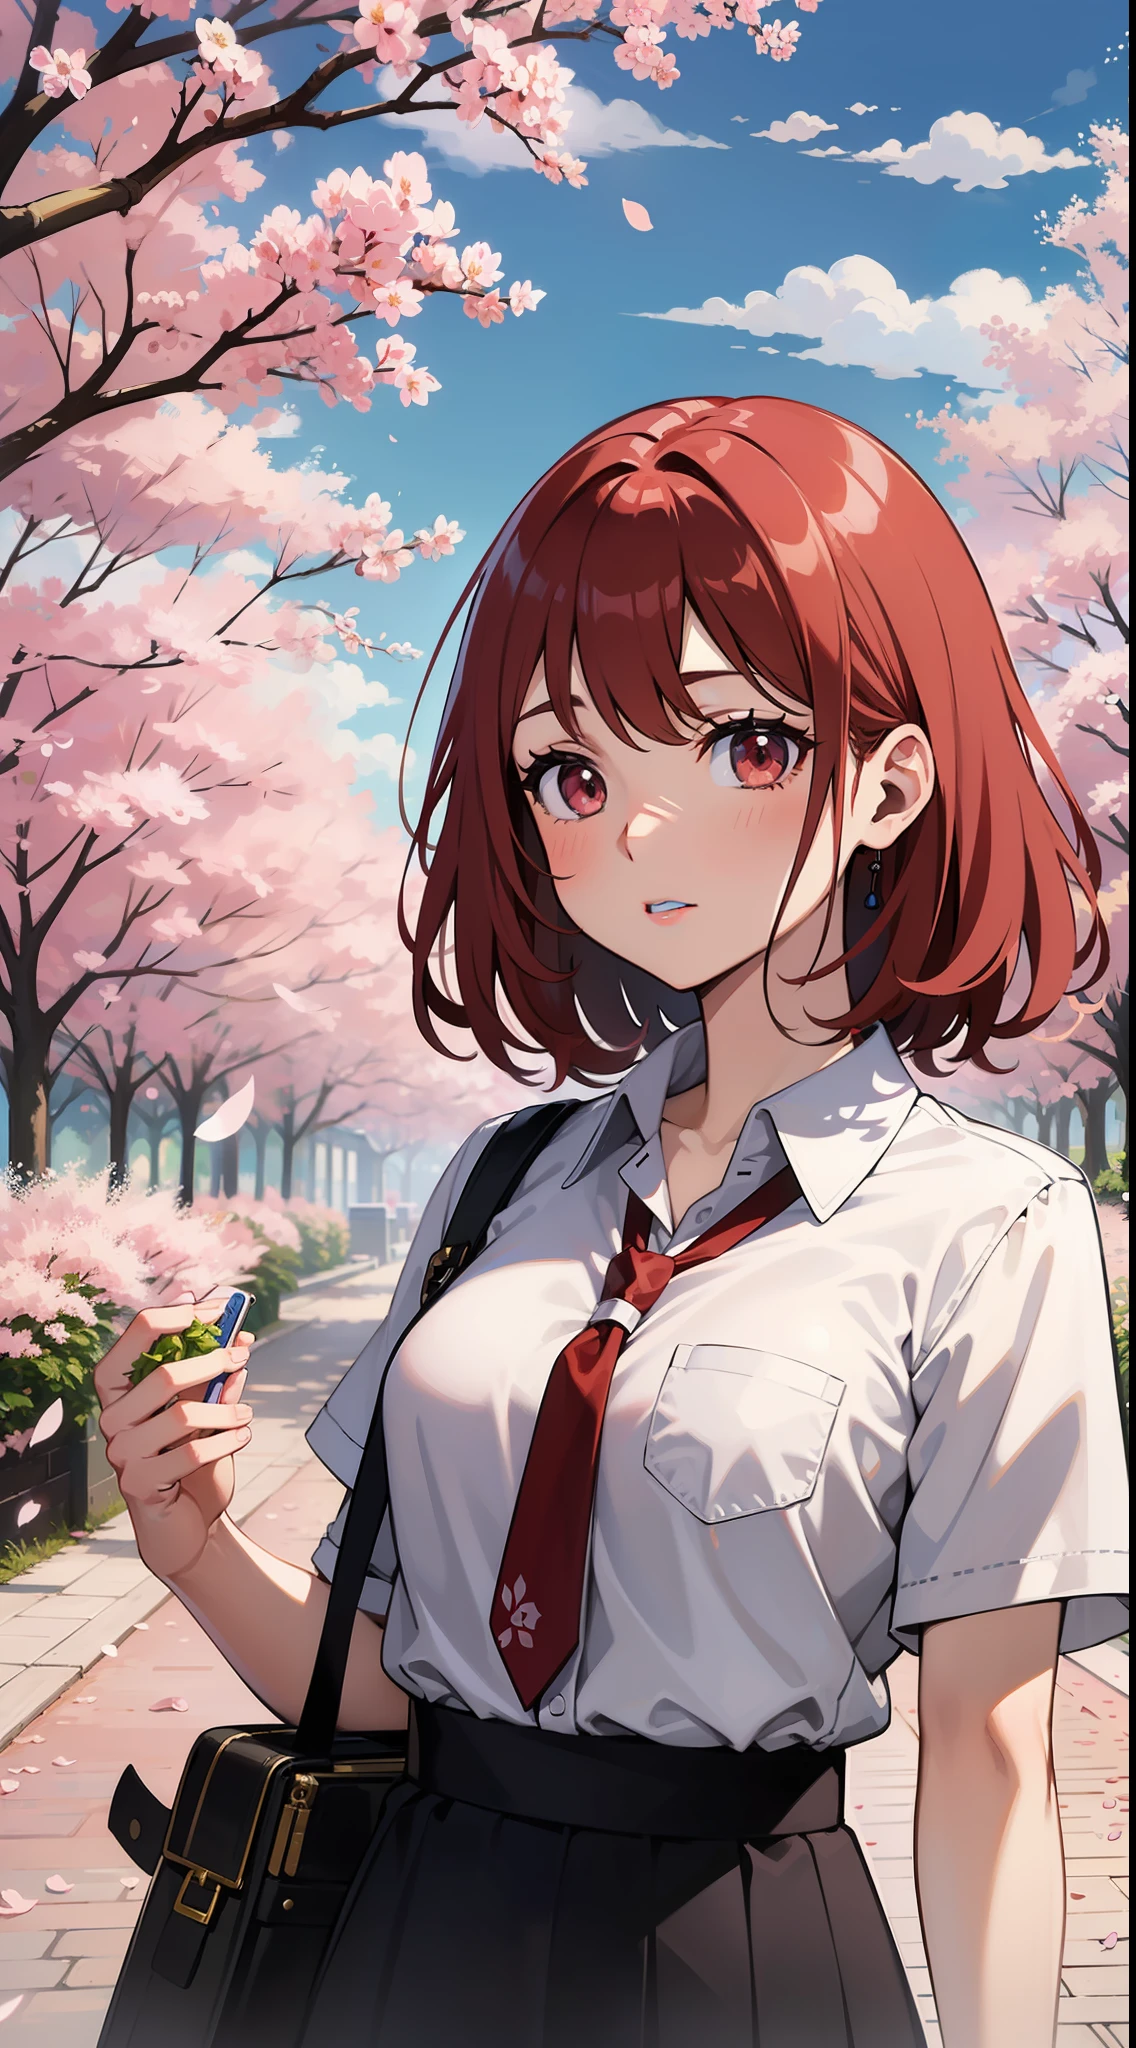 A red-haired girl stands in front of a cherry blossom, a detailed painting by Kobayashi Kiyochika, Featured on Pixiv, Remodernism, official art, anime, anime aesthetic